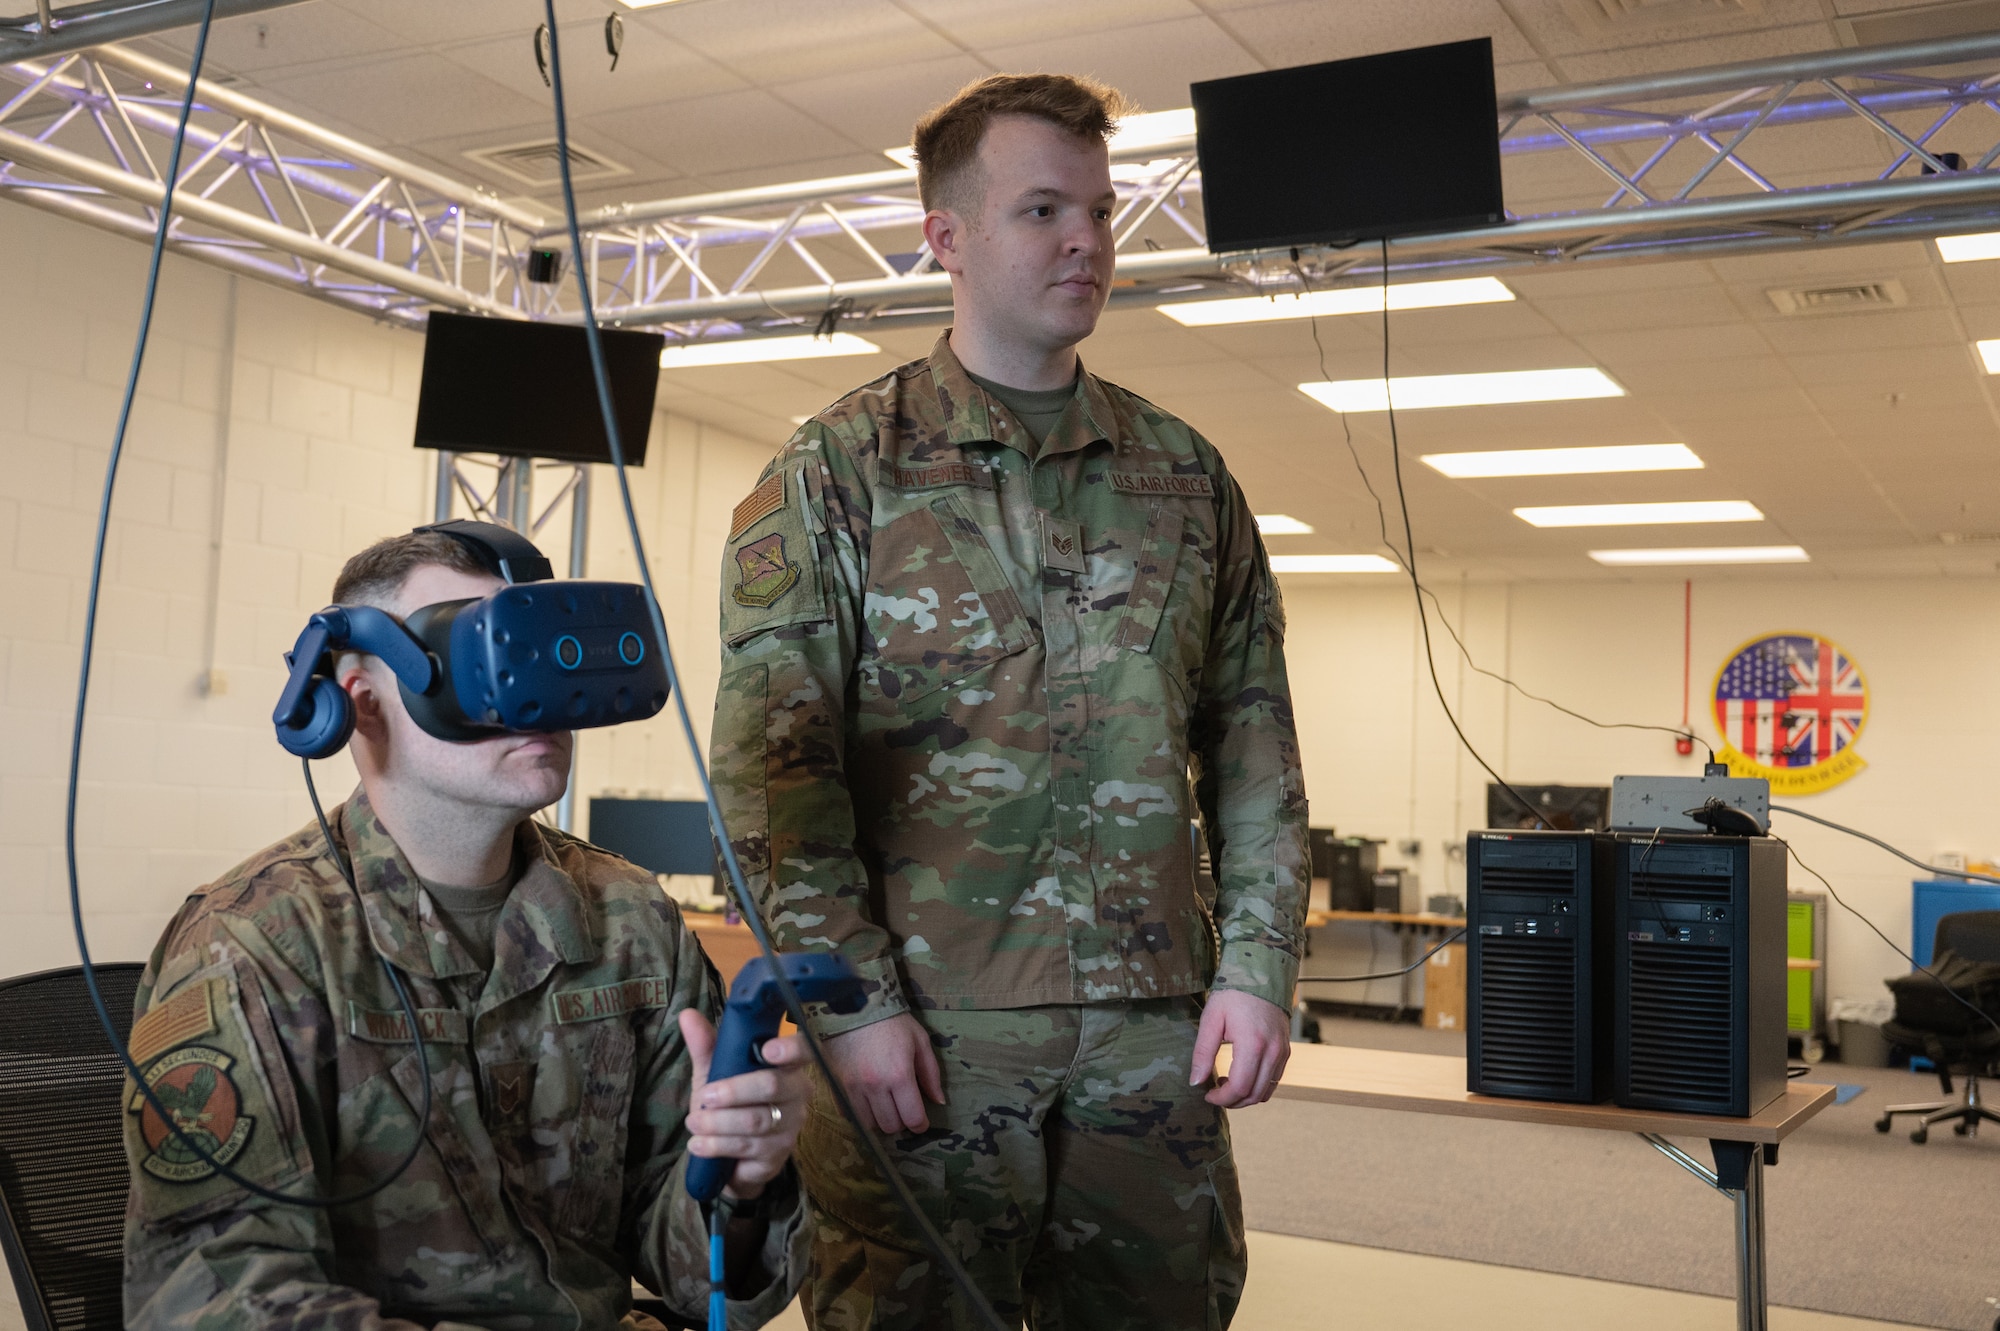 U.S. Air Force Tech. Sgt. Jacob Womack, left, 100th Maintenance Group aerospace propulsion craftsman and NCO in charge of development, and Staff Sgt. Jeremiah Havener, right, 100th MXG aircraft electrical and environmental systems craftsman and NCO in charge of virtual reality, uses a virtual reality system to complete a KC-135 Stratotanker aircraft technical order at Royal Air Force Mildenhall, England June 28, 2023.